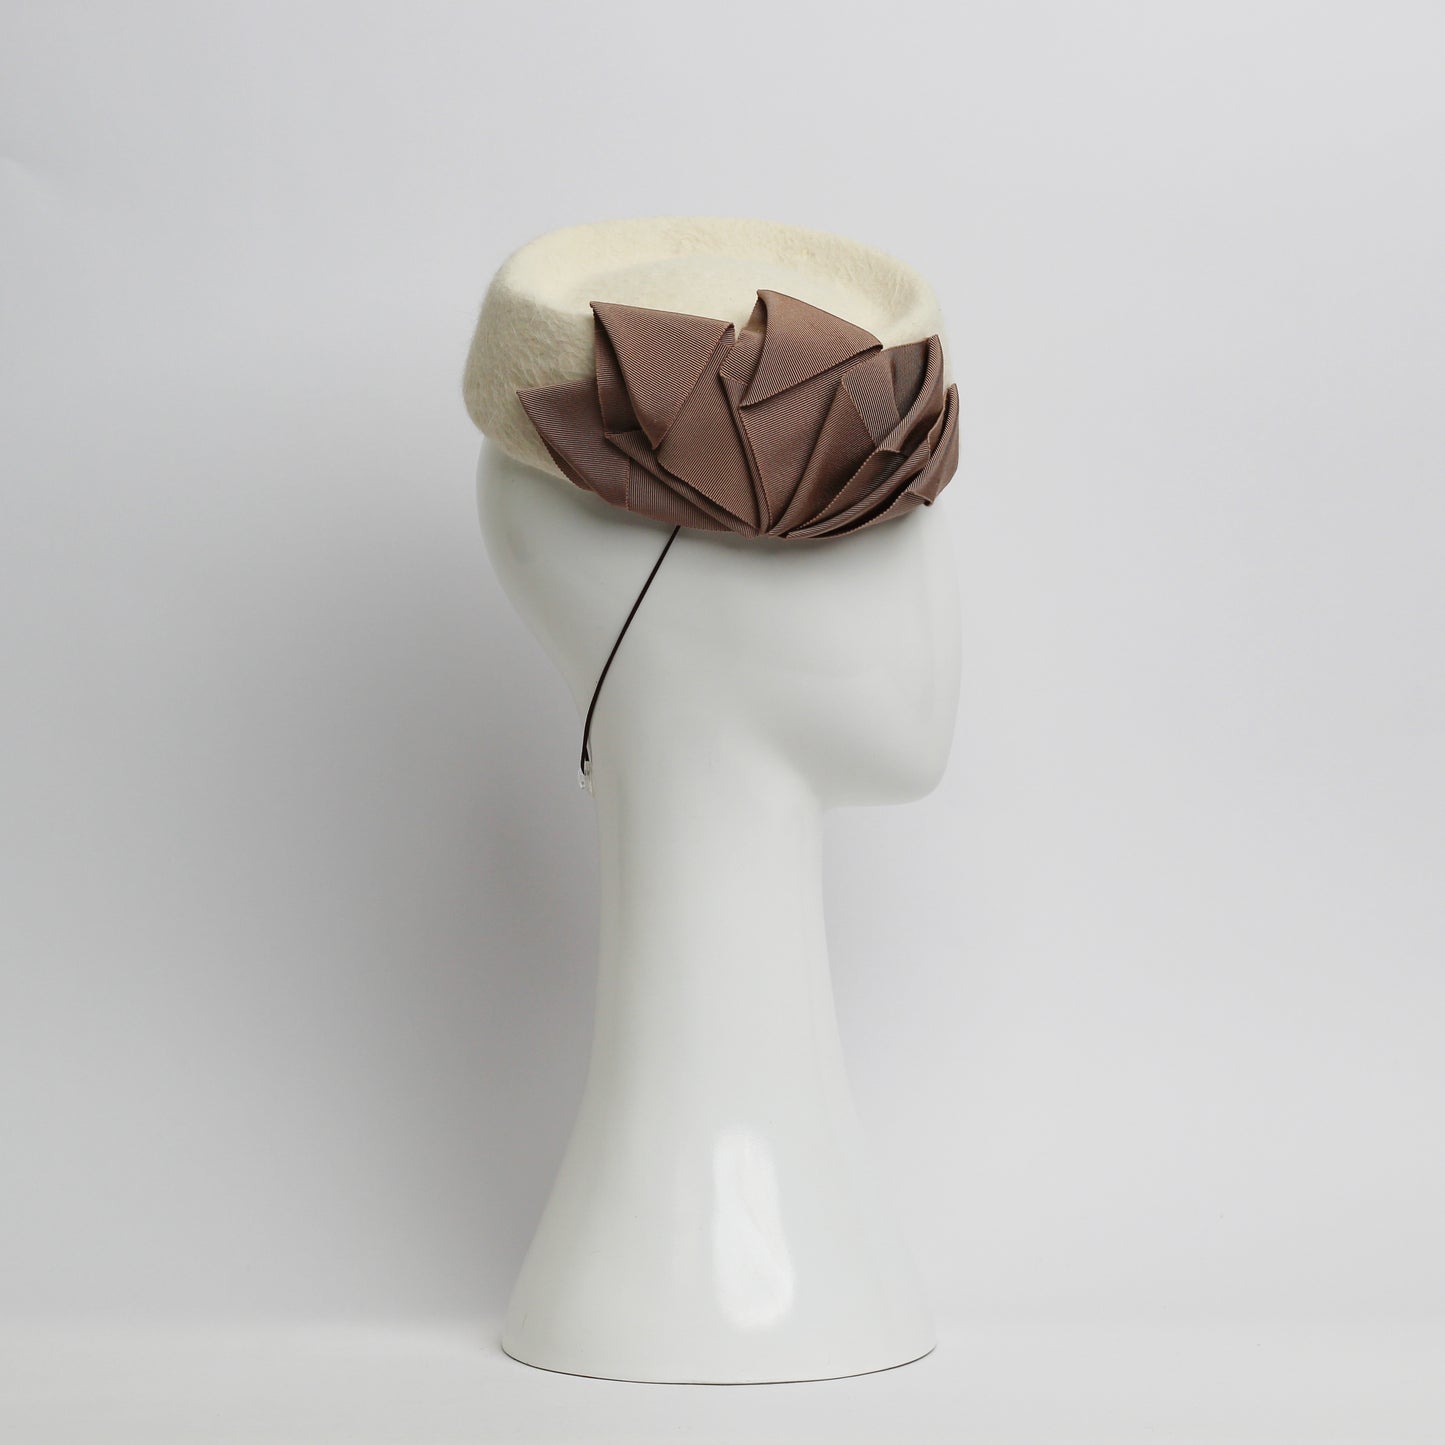 Fur felt Cream pillbox headpiece with pile trimmed taupe ribbon cockade by milliner Lauren J Ritchie 